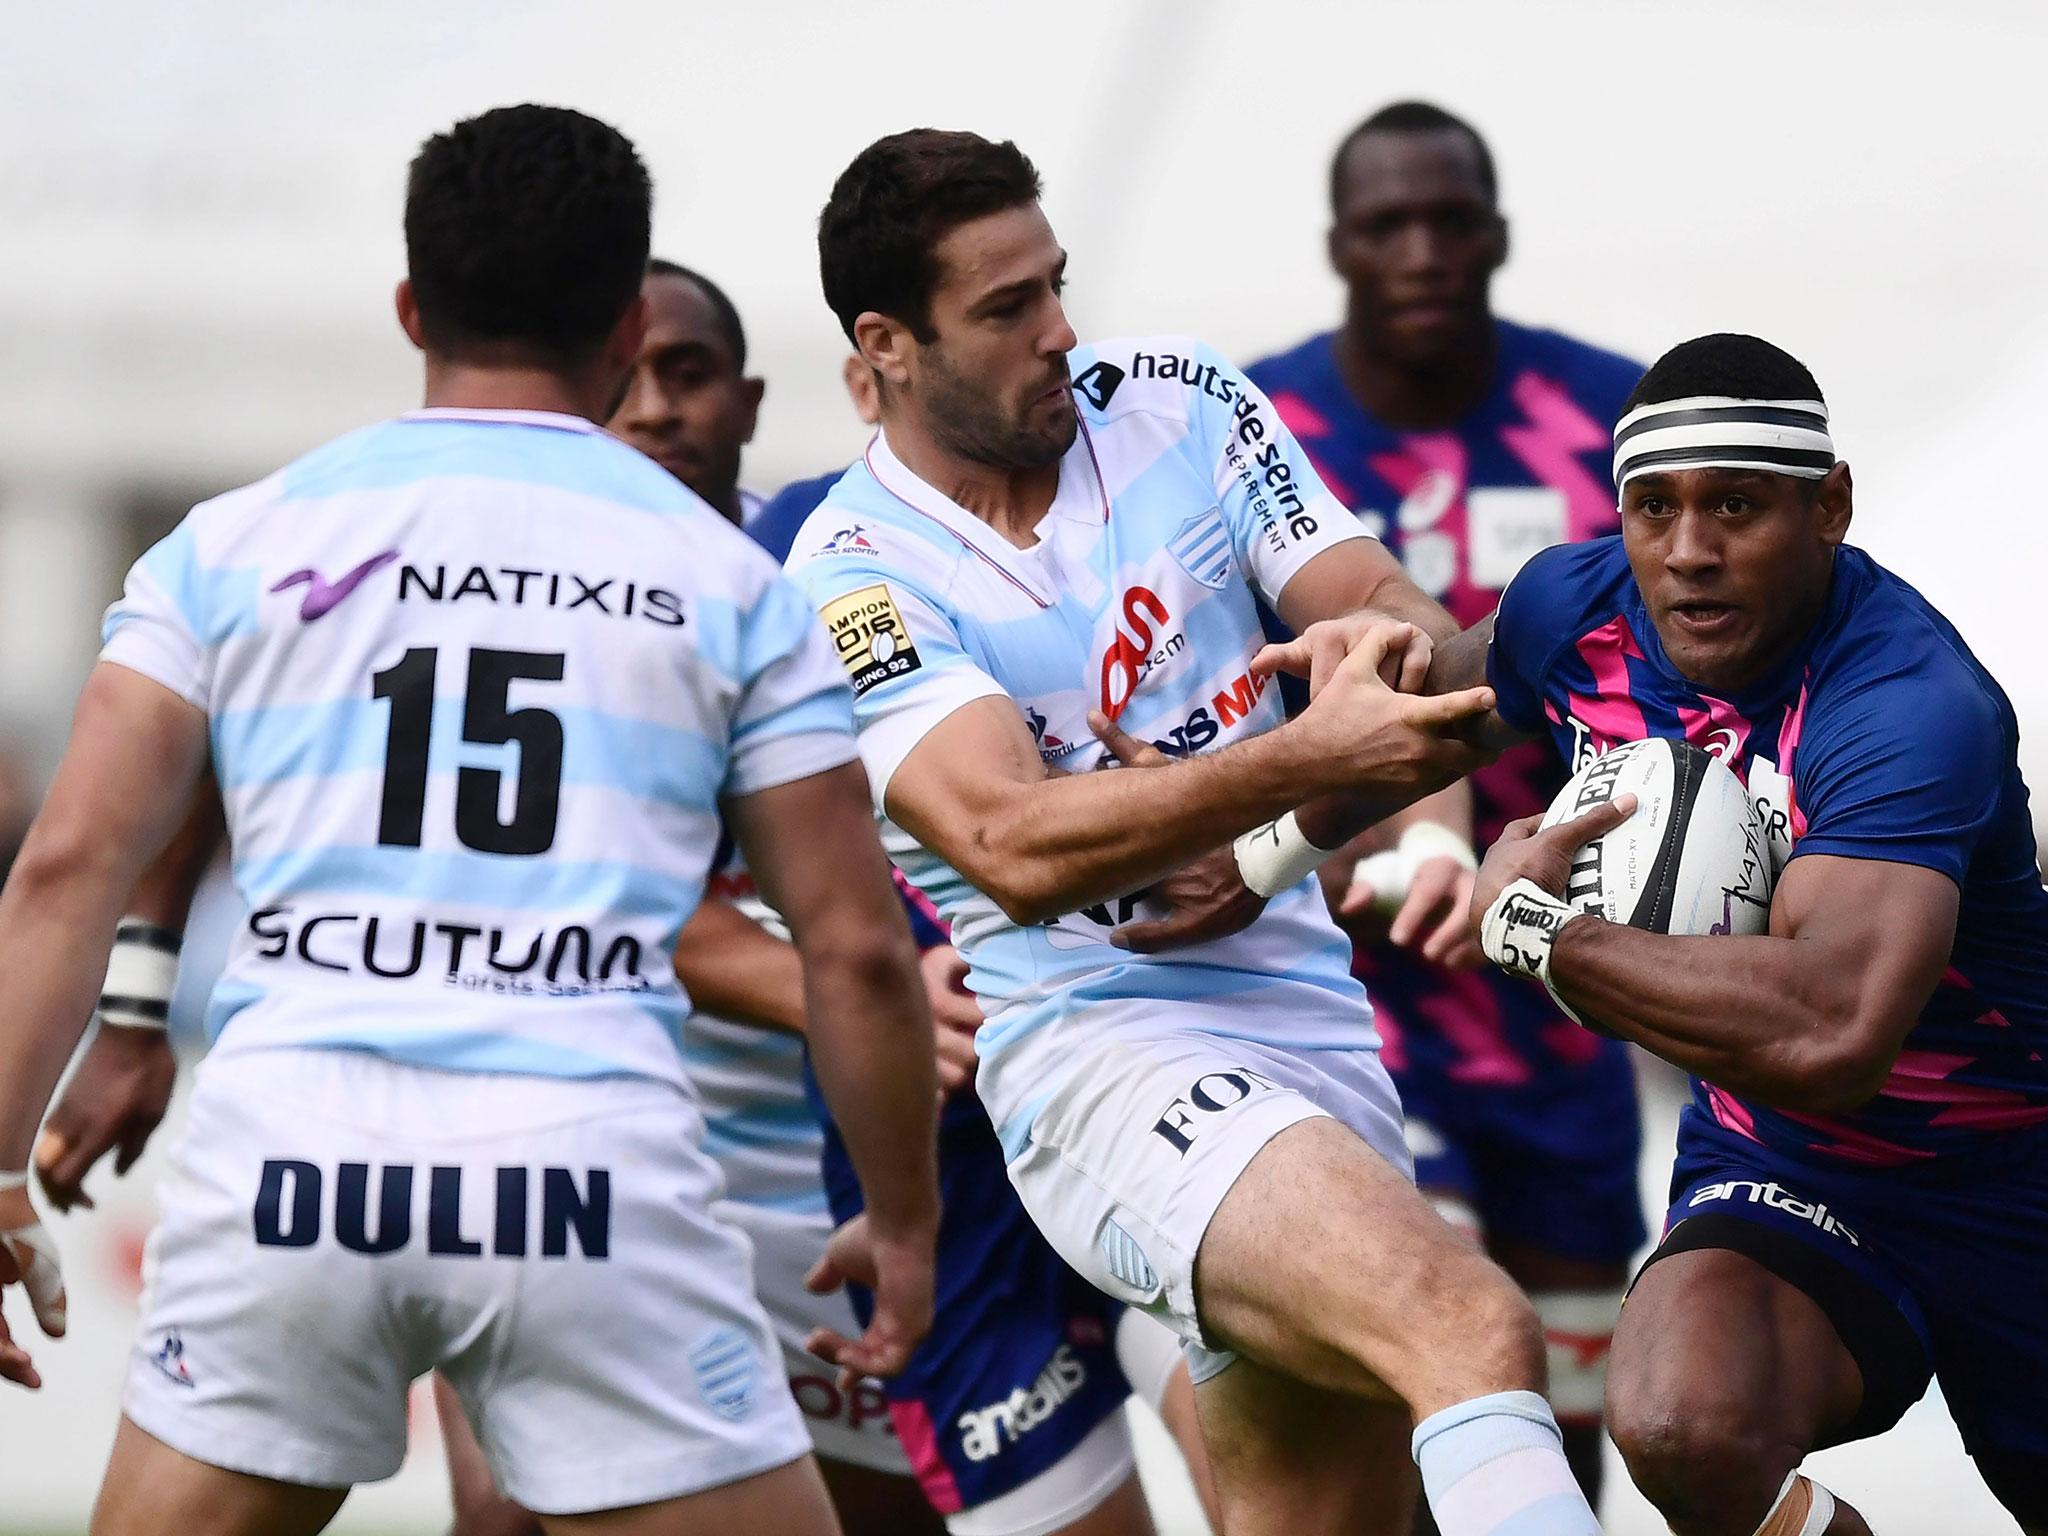 Racing 92 and Stade Francais will merge into one club from 2017/18